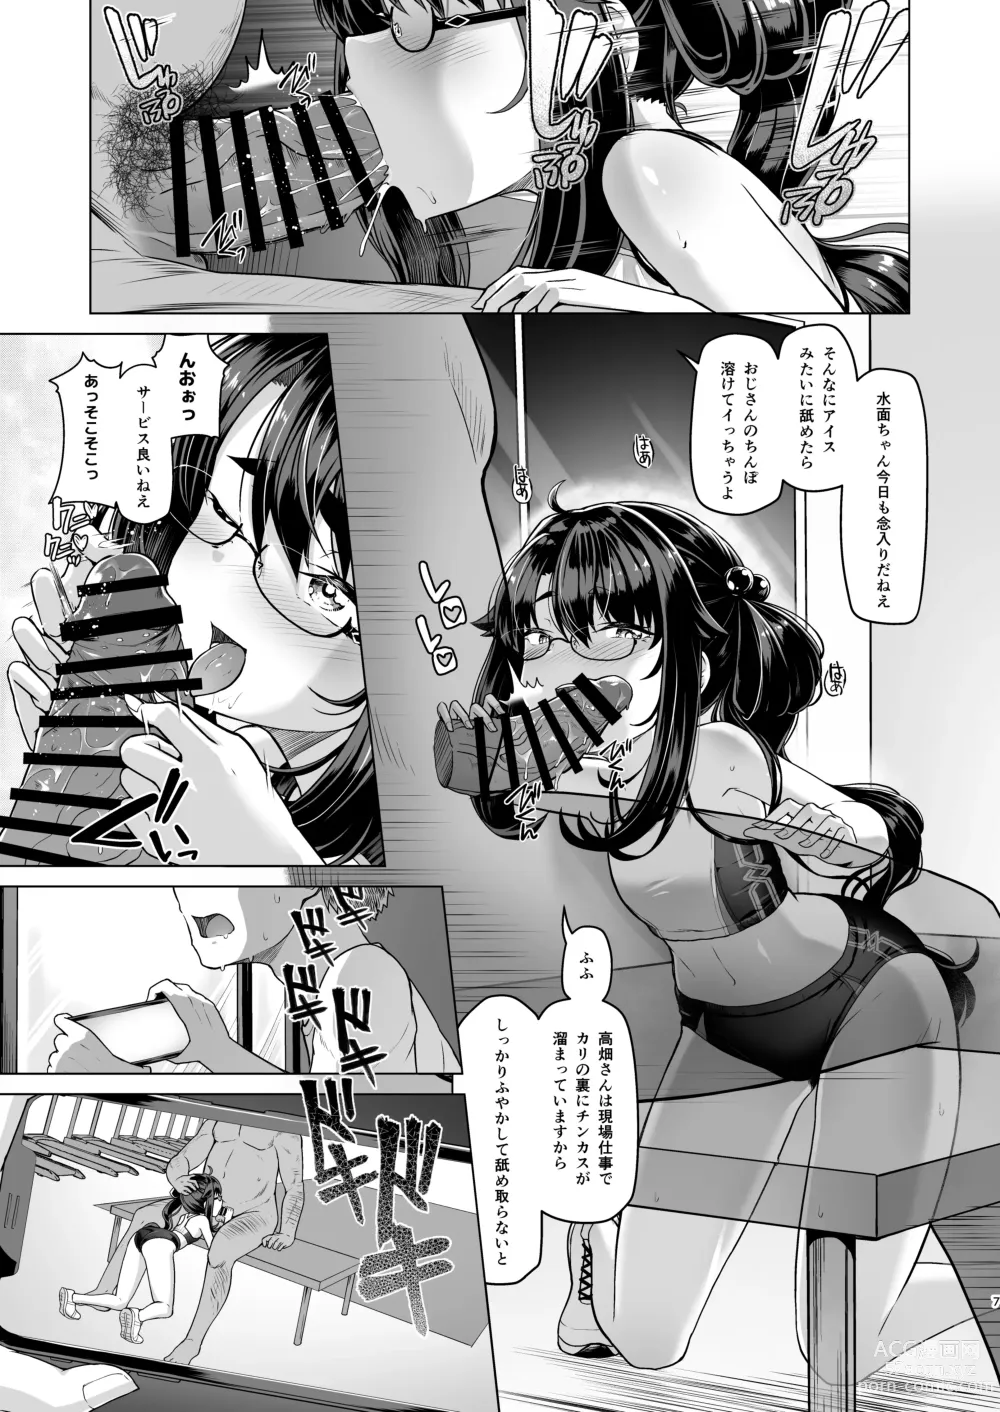 Page 6 of doujinshi 僕だけが知っている深夜の水面